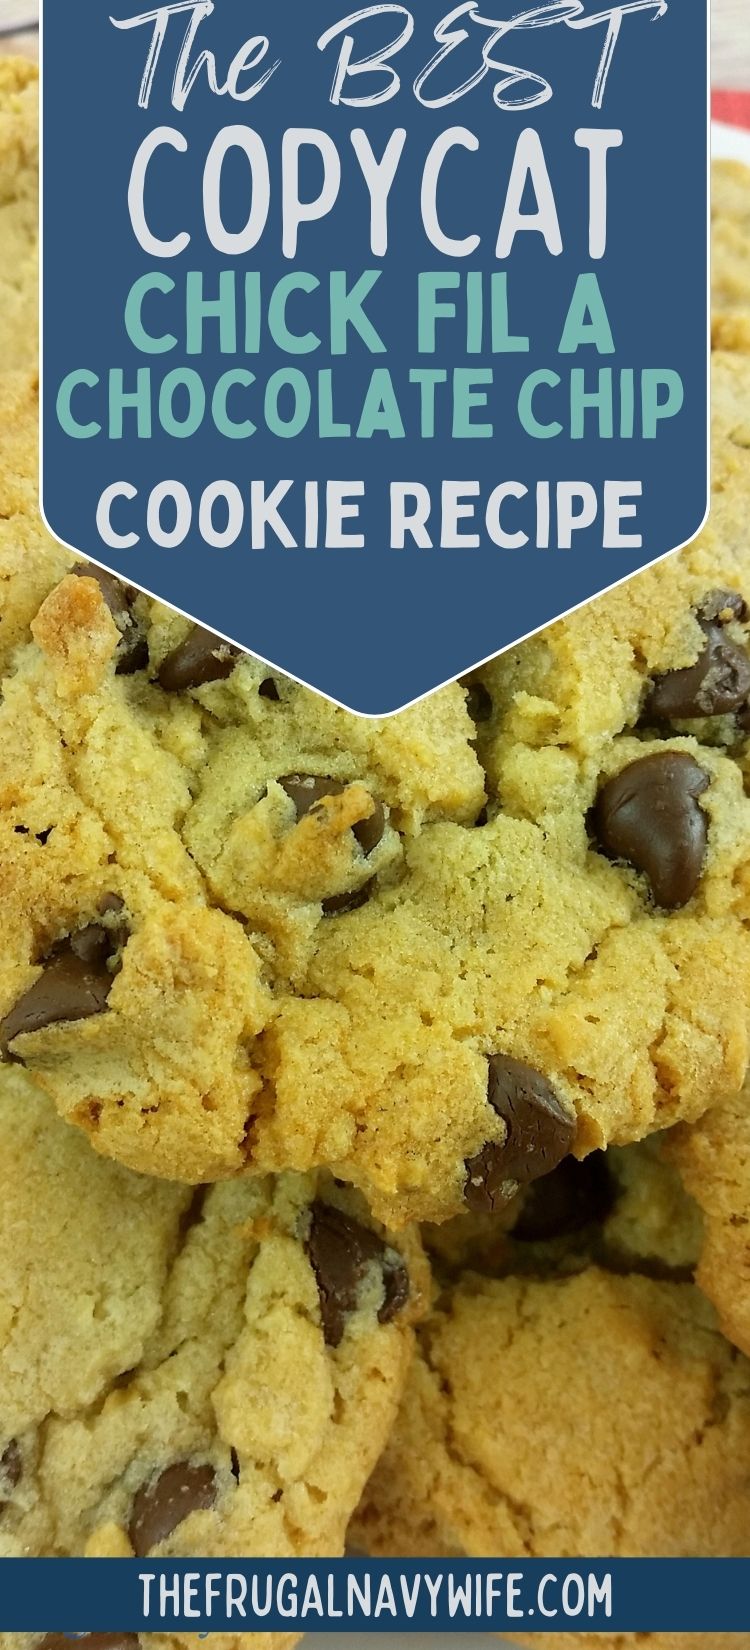 https://www.thefrugalnavywife.com/wp-content/uploads/2017/04/The-BEST-Copycat-Chick-Fil-A-Chocolate-Chip-Cookie-Recipe-Social-1.jpg